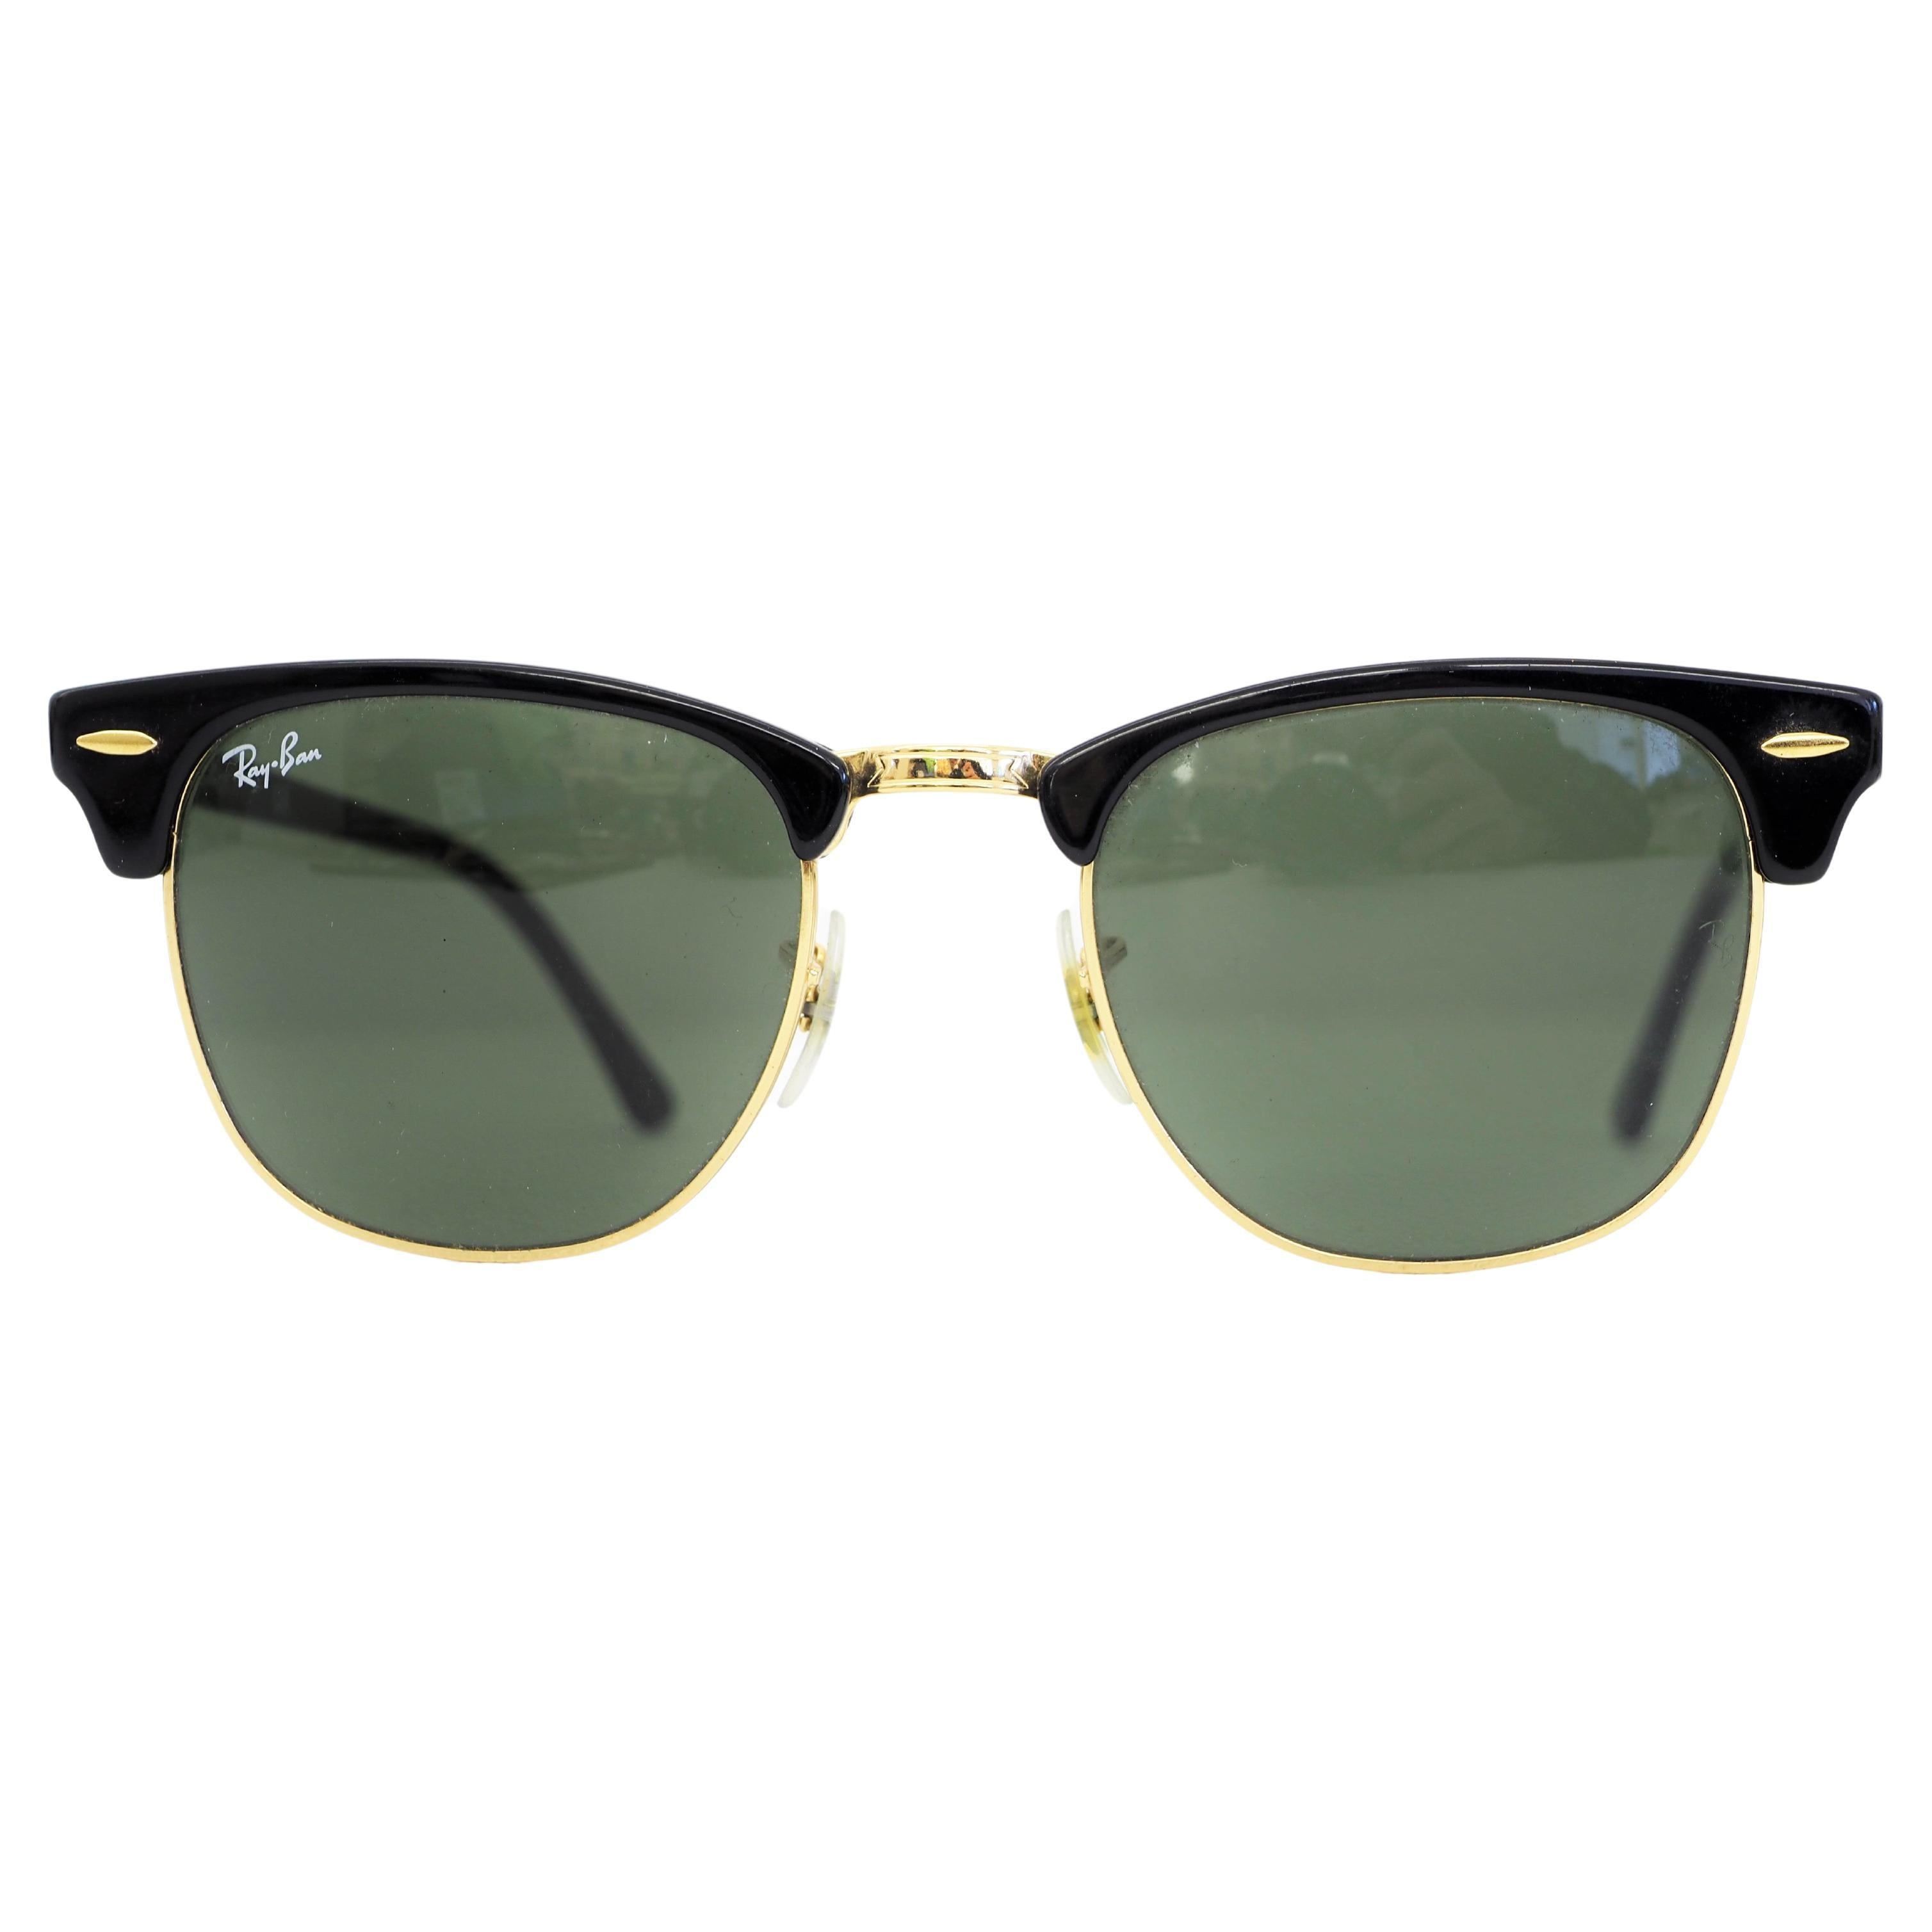 Ray-Ban black gold sunglasses For Sale